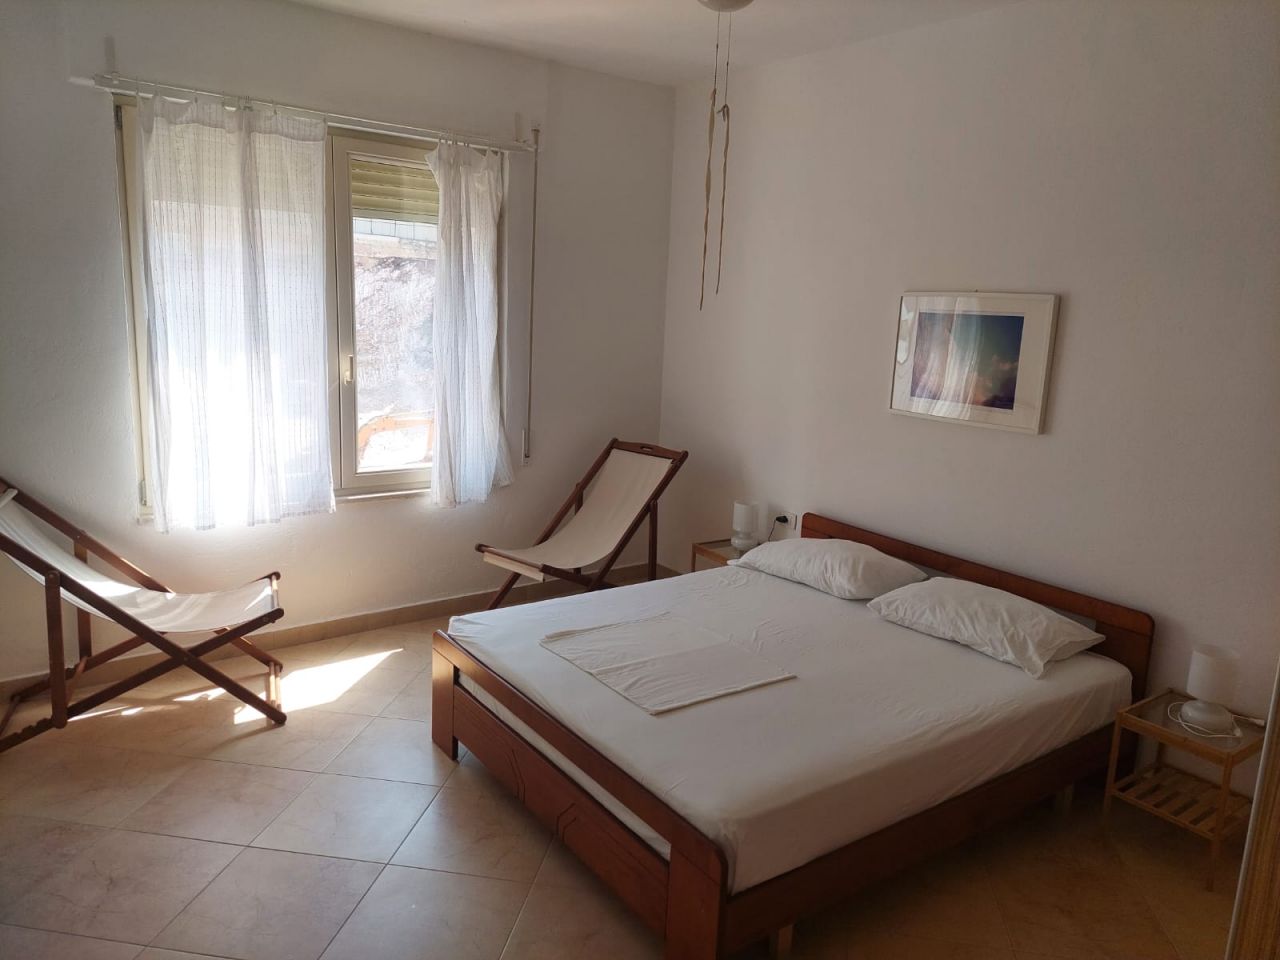 RENT HOLIDAY APARTMENT IN SARANDE. ENJOY VACATION IN ALBANIA 